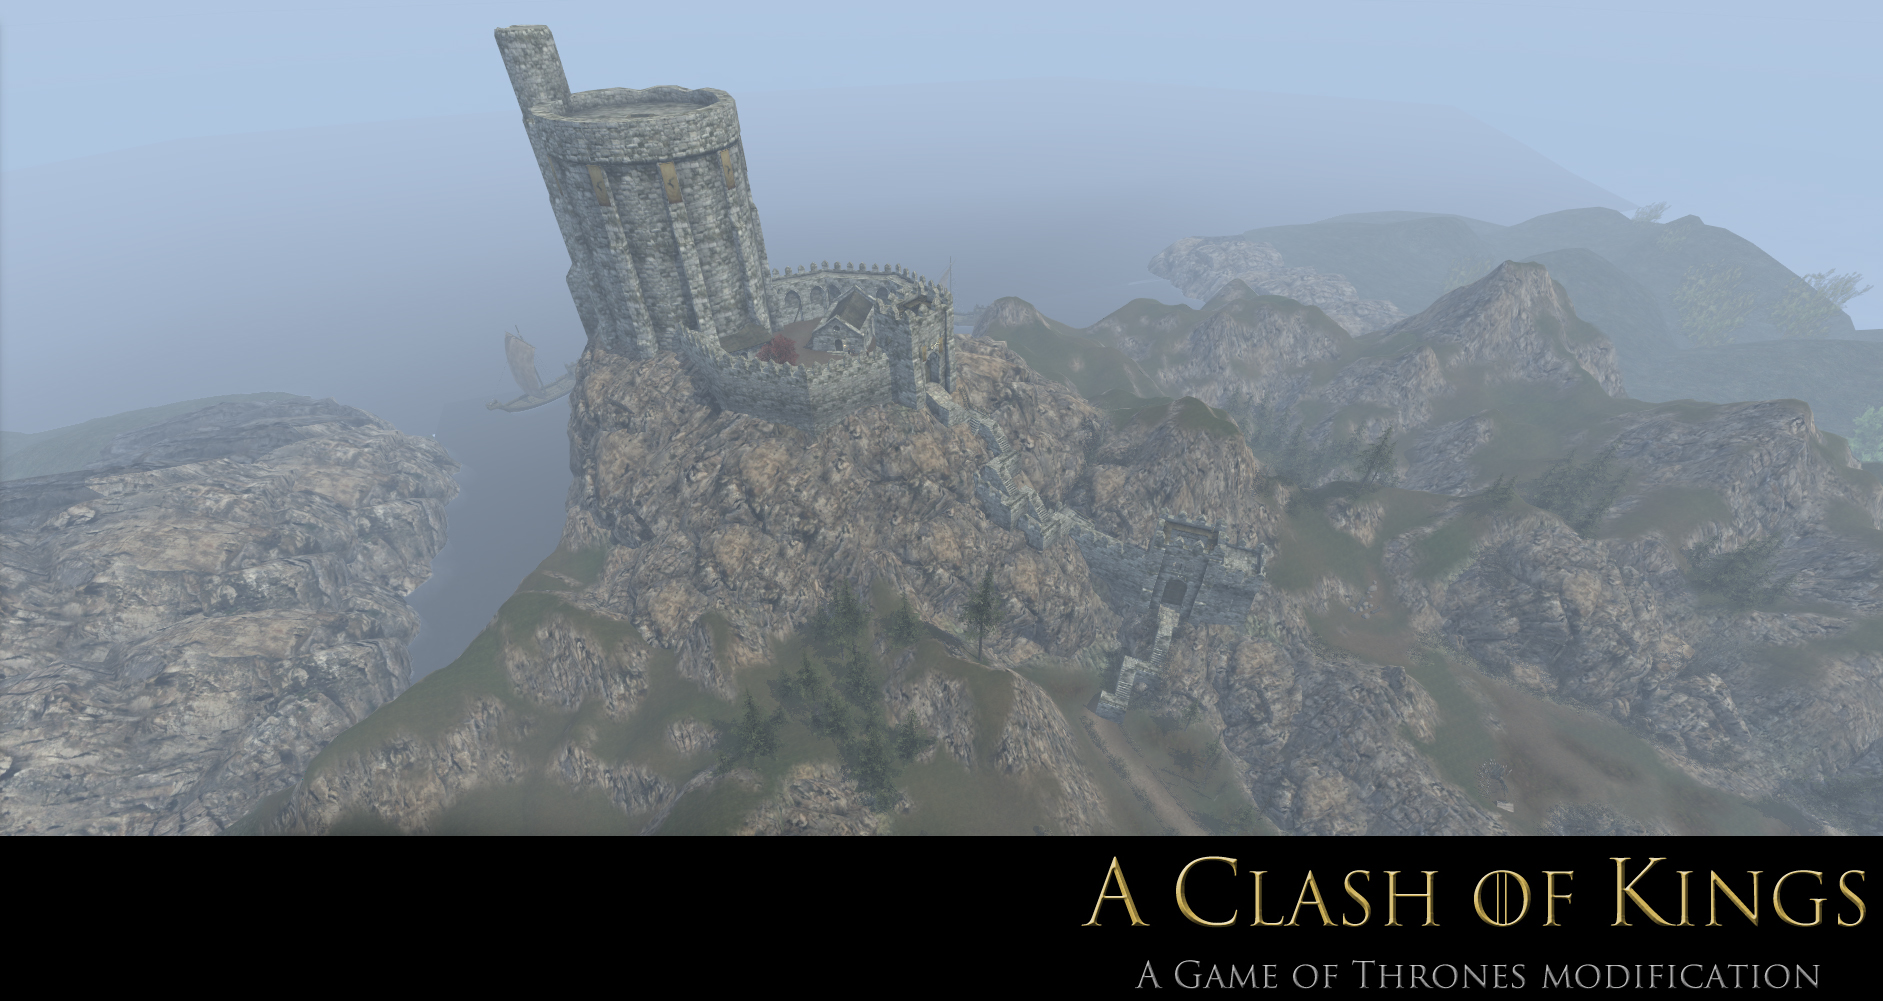 Caul image - A Clash of Kings (Game of Thrones) mod for Mount